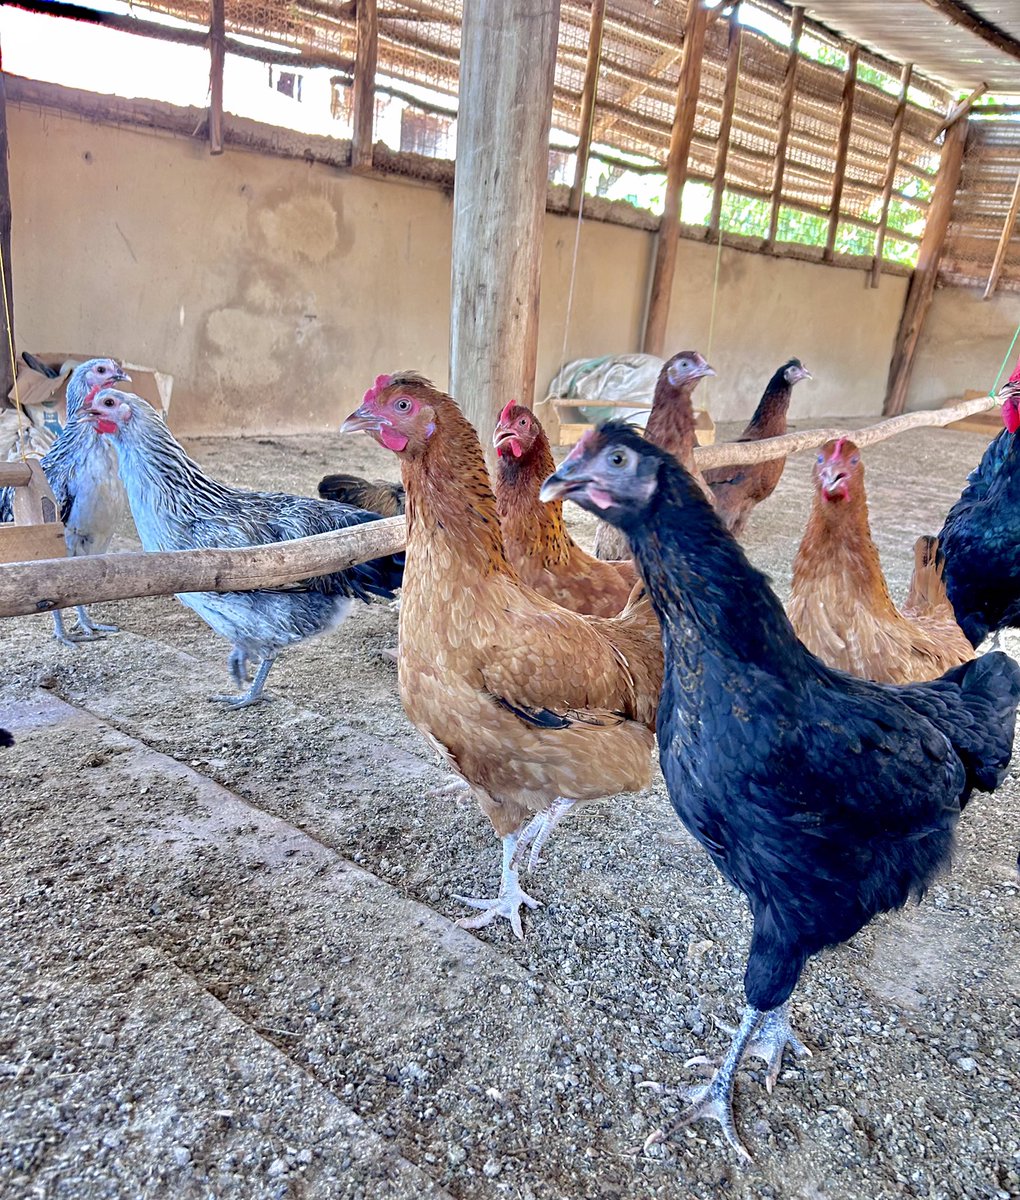 Raising Chicken For Sustainability

Did you know that raising chicken can be a powerful tool for sustainable living? 

Here are just a few reasons why: Thread 🧵 

#Sustainability #chickenkeeping #Backyardchickens #Greenliving #Ecofriendly